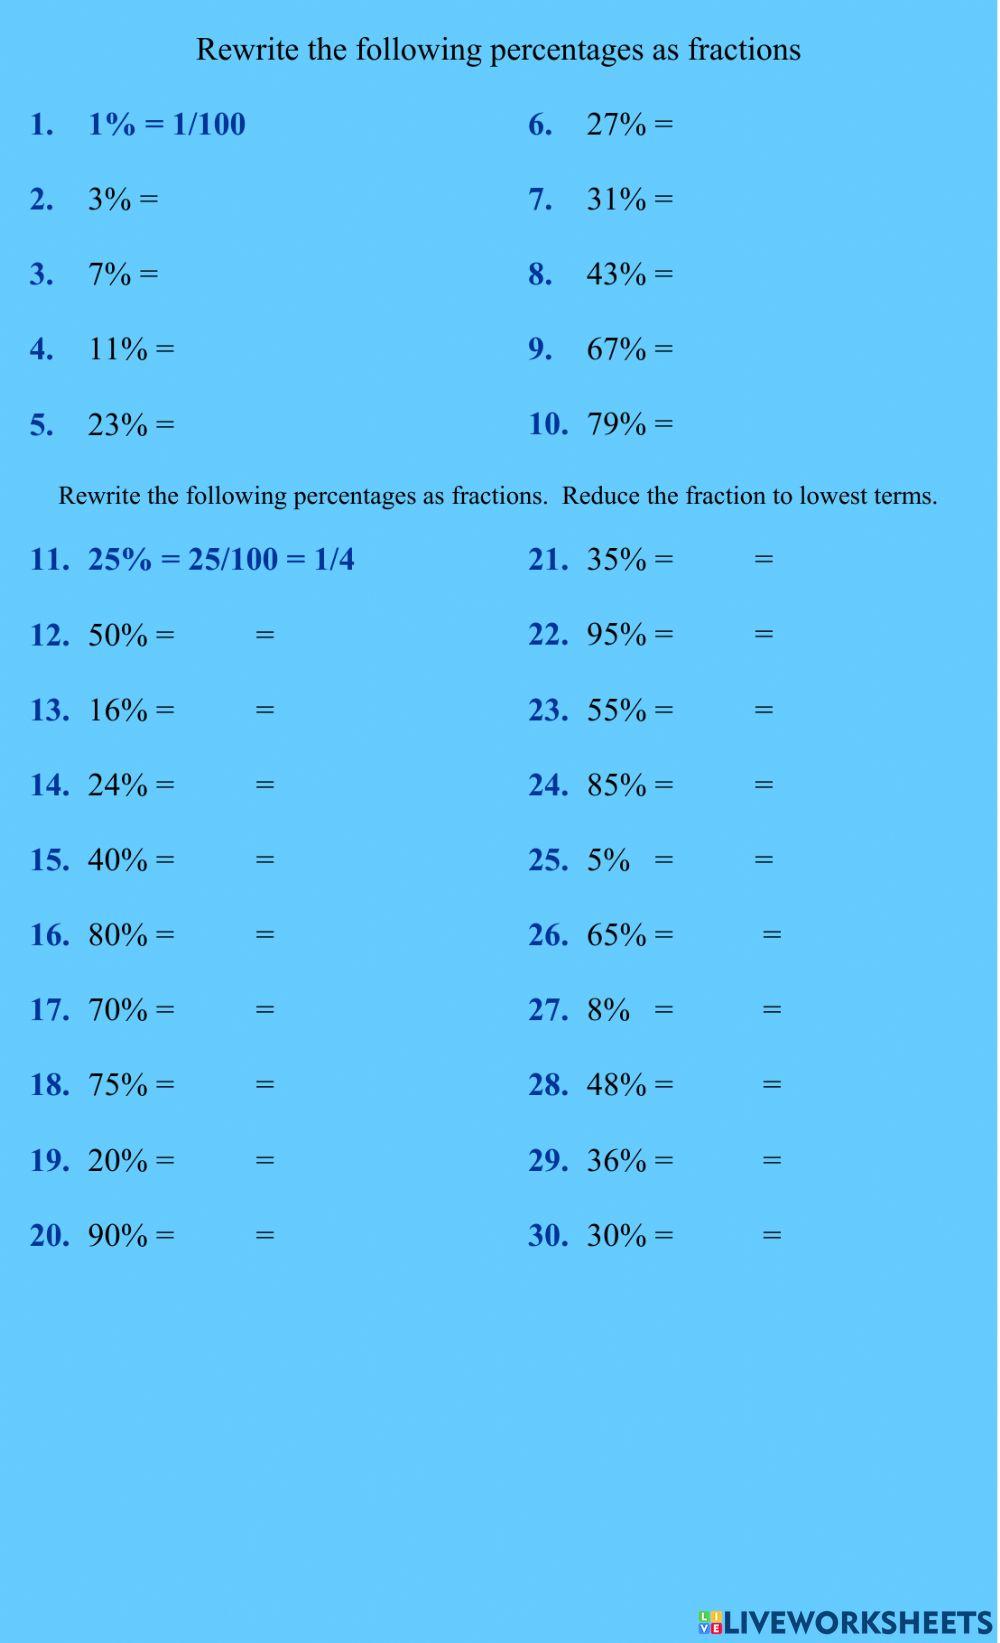 Rewriting Percentages as Fractions